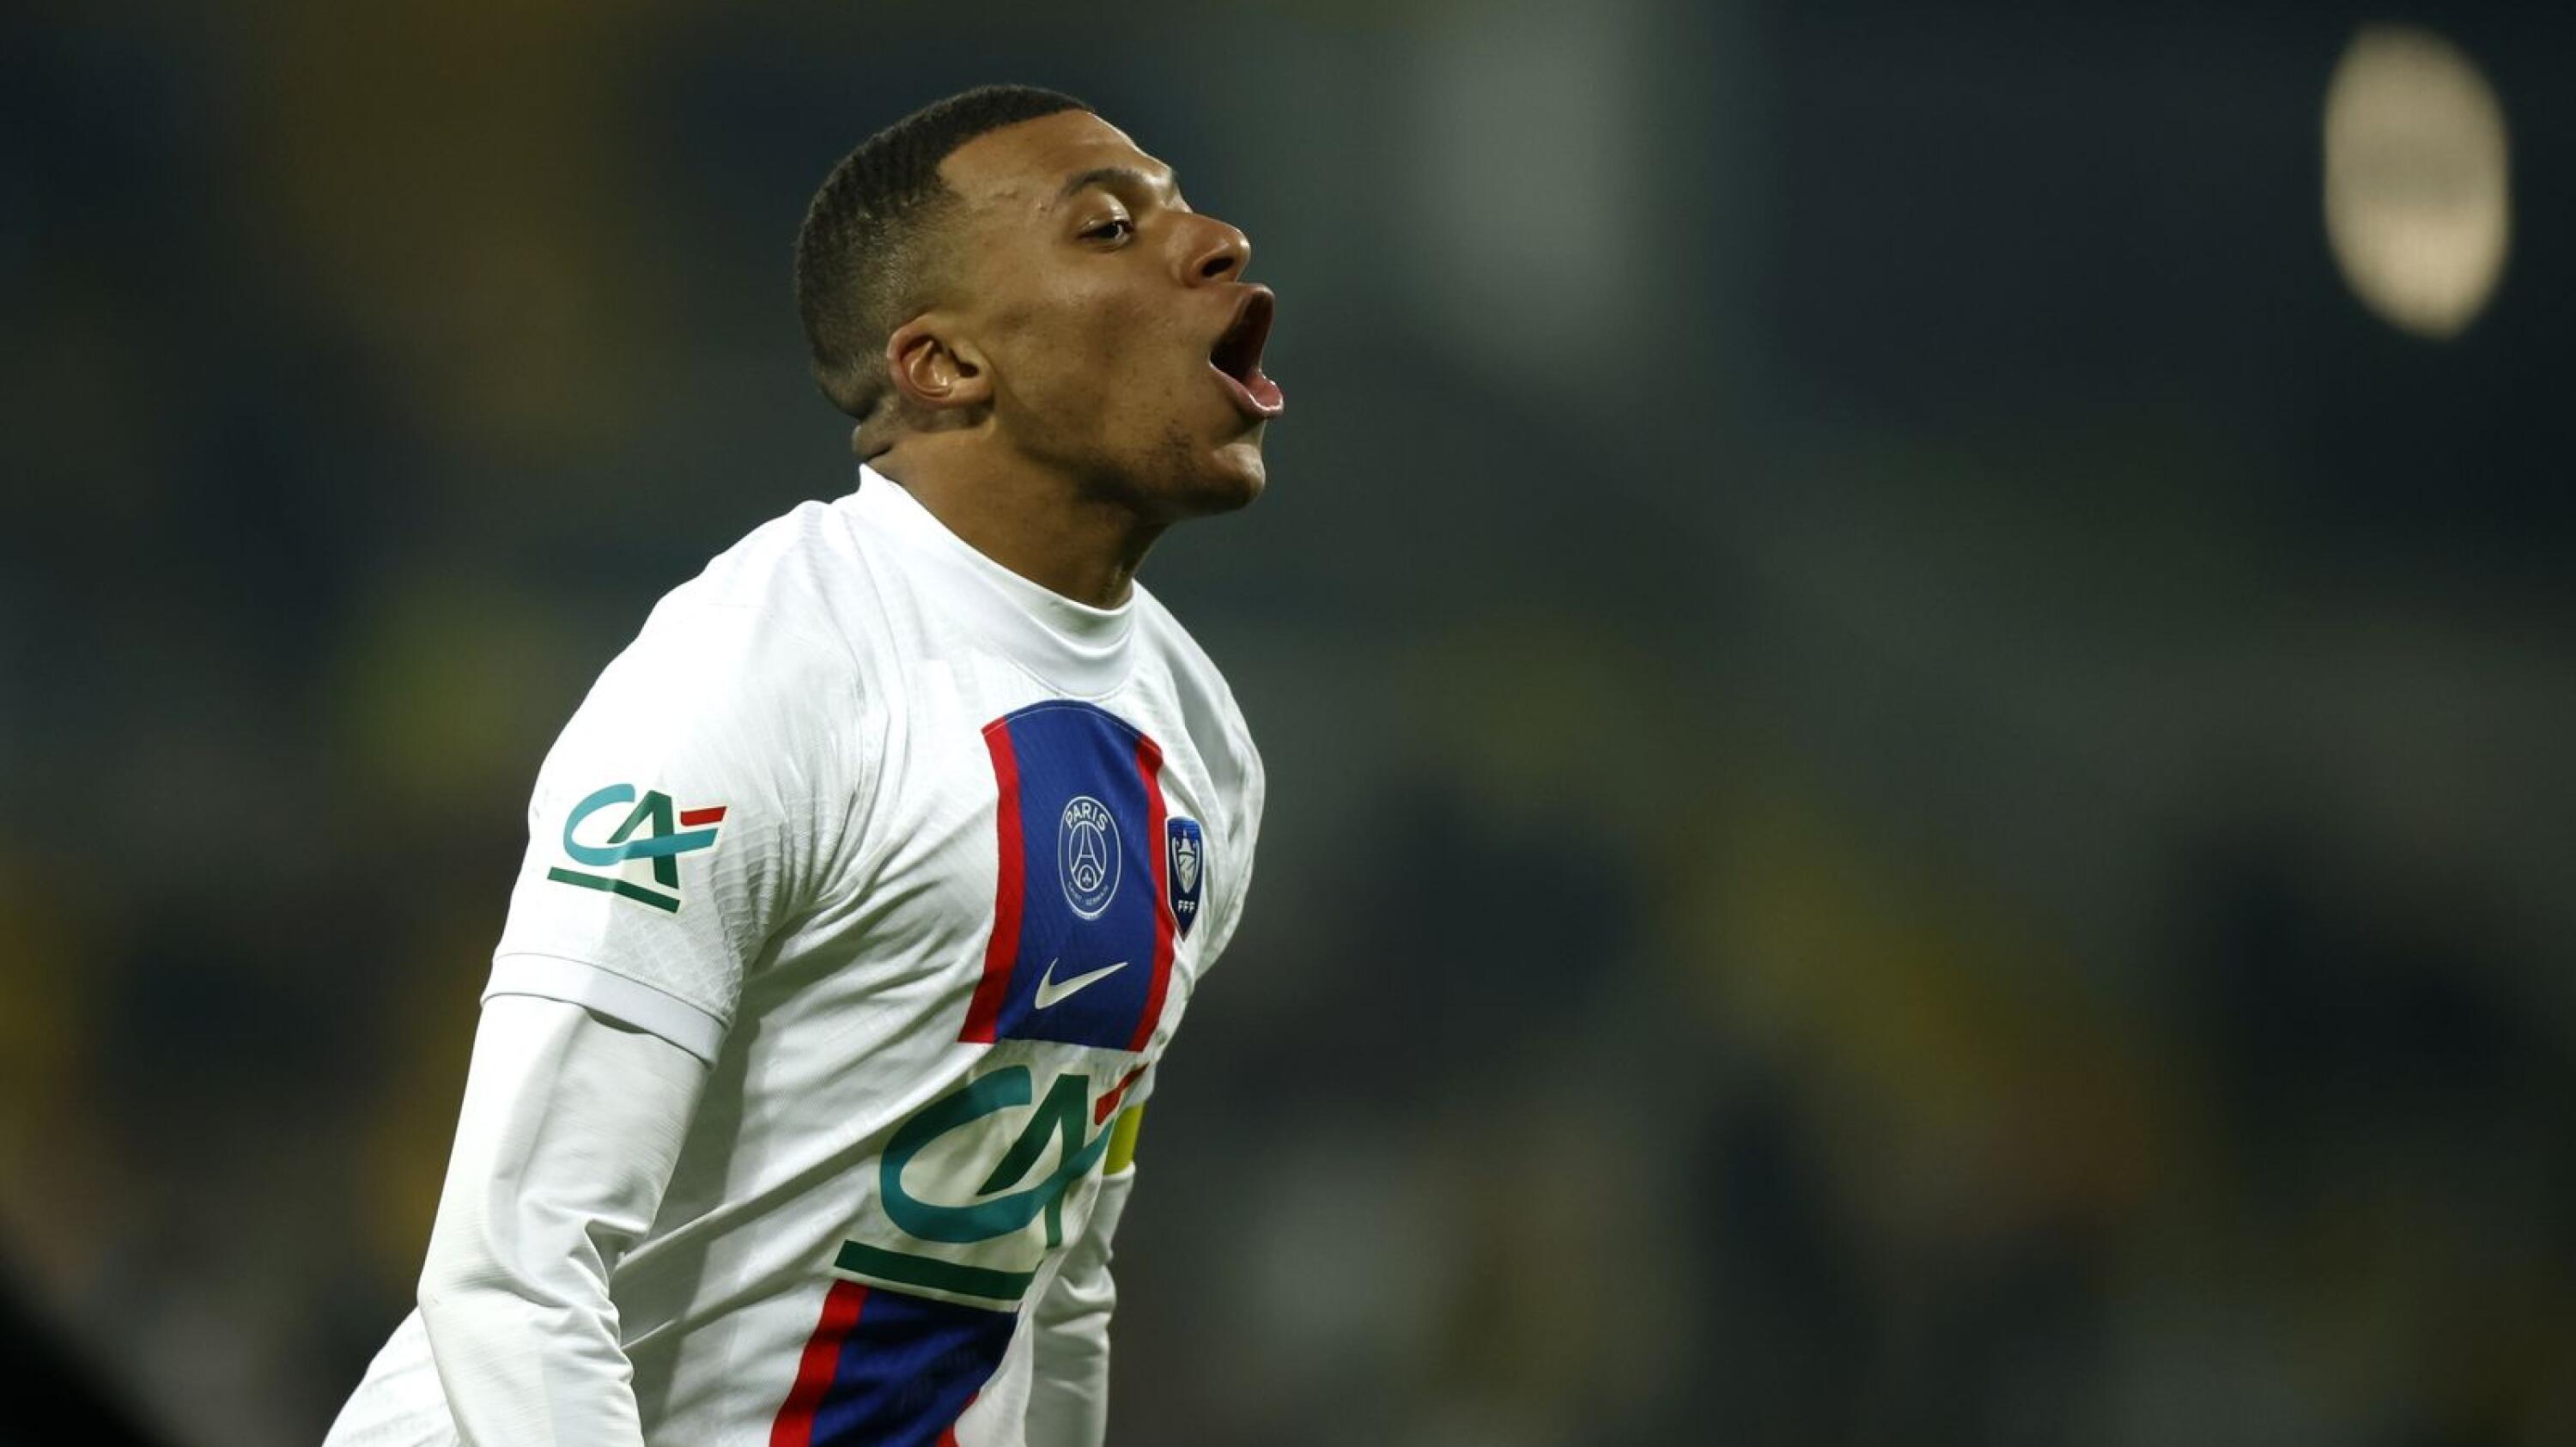 PSG’s Kylian Mbappe  reacts during the Coupe de France round of 32 soccer match against Pays de Cassel 